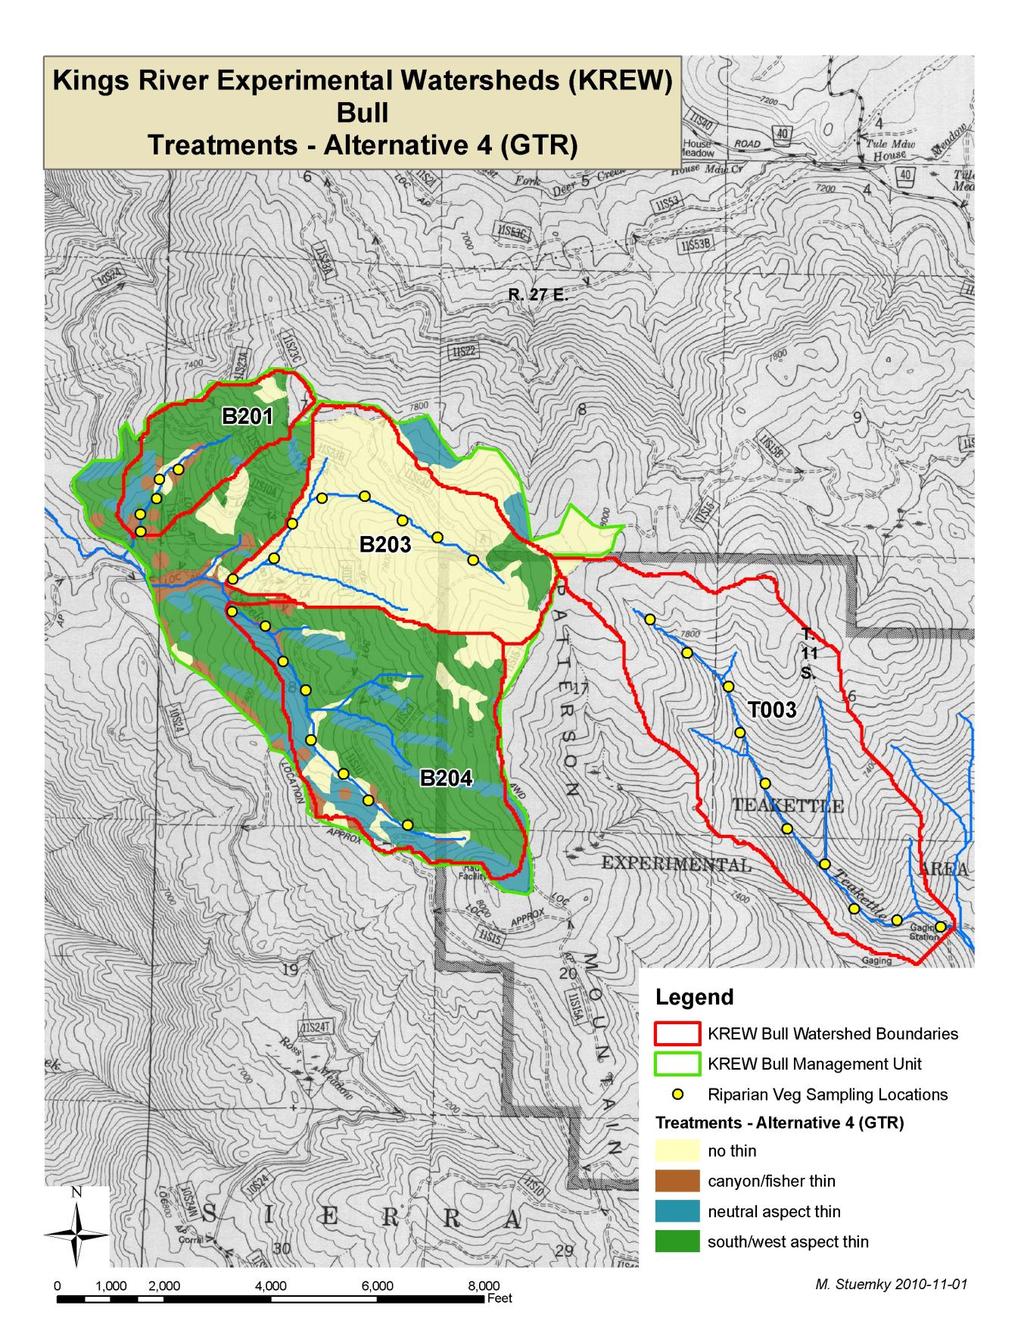 Figure 3-8-3. Permanent transects for sampling of treatment effects on riparian vegetation of the Bull Unit research watersheds.